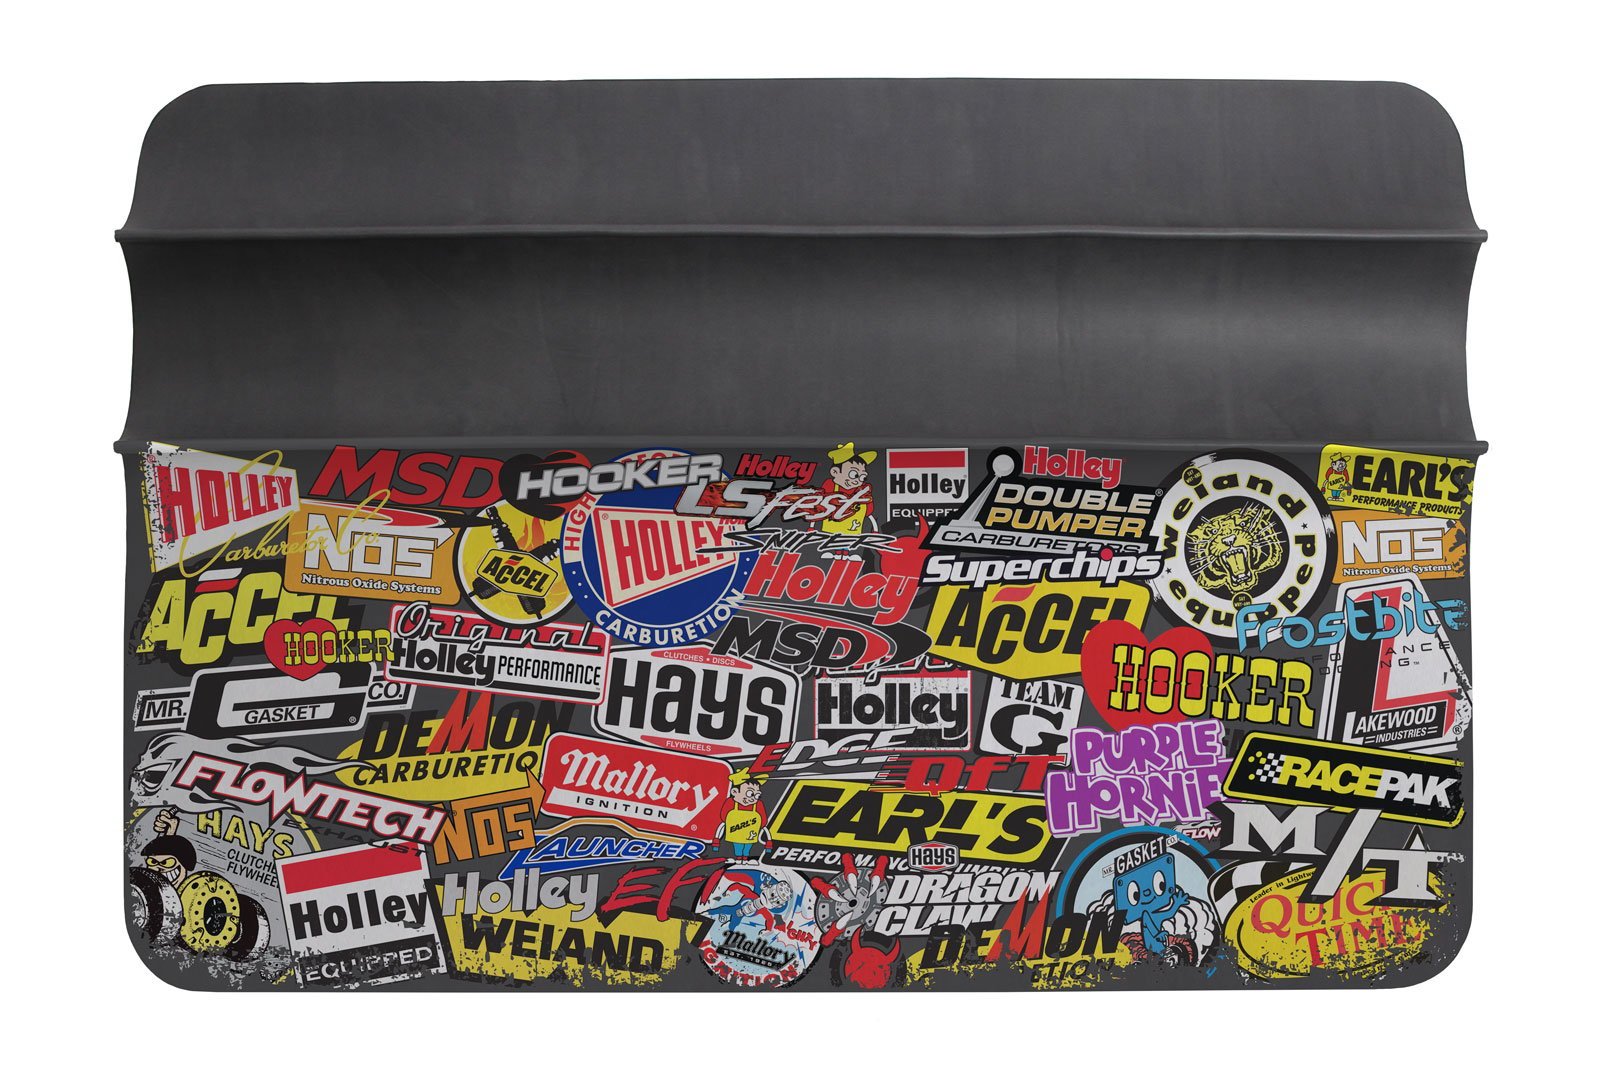 HOLLEY STICKER BOMB FENDER COVER - 36in X 26in 36-445